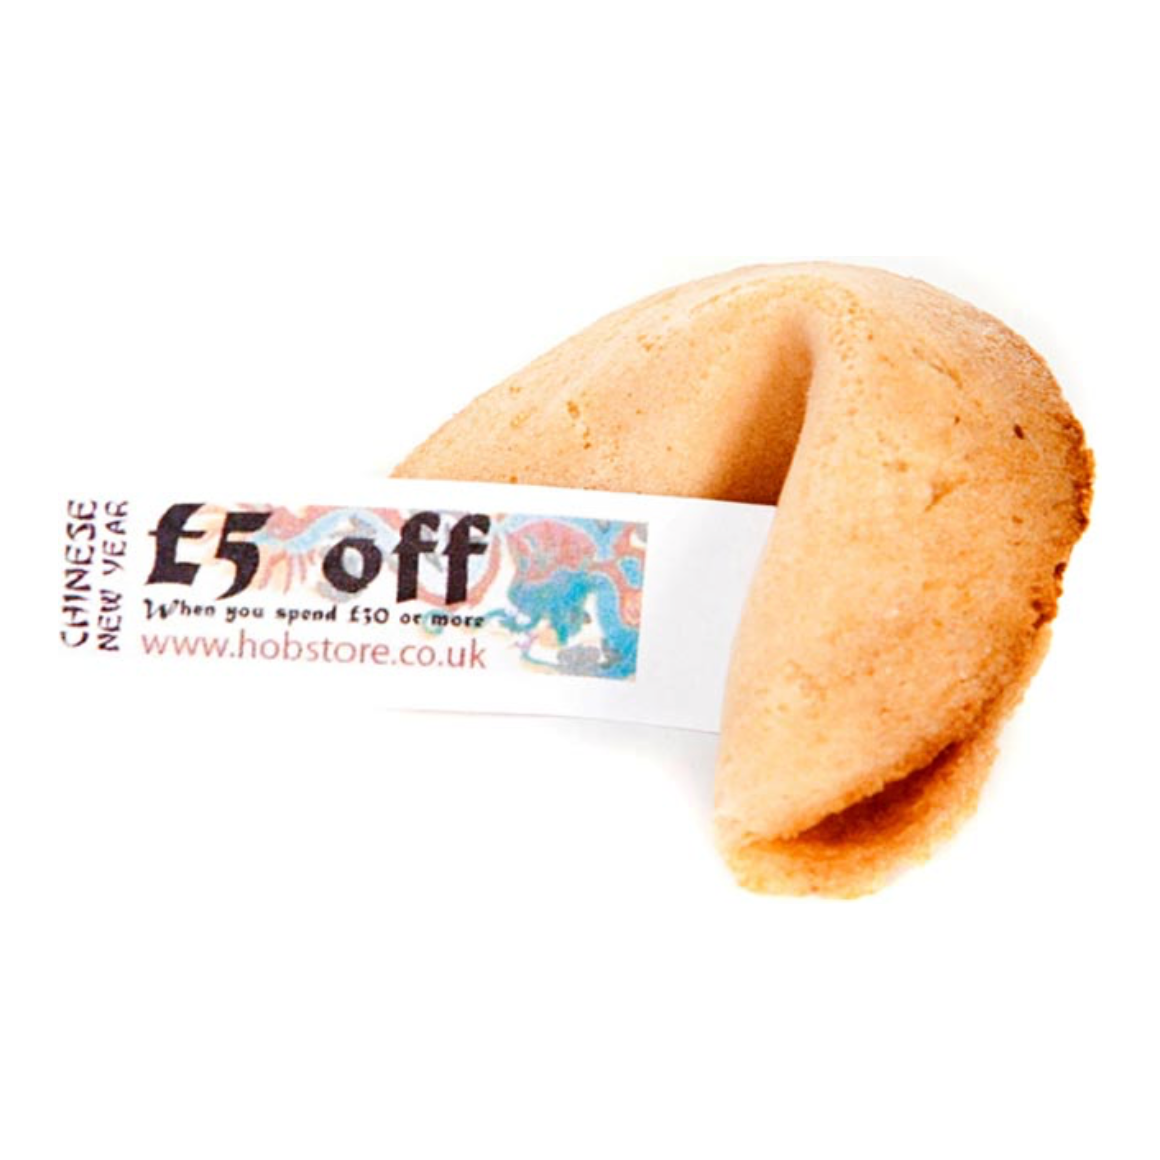 Personalised Fortune Cookies  Black and White London